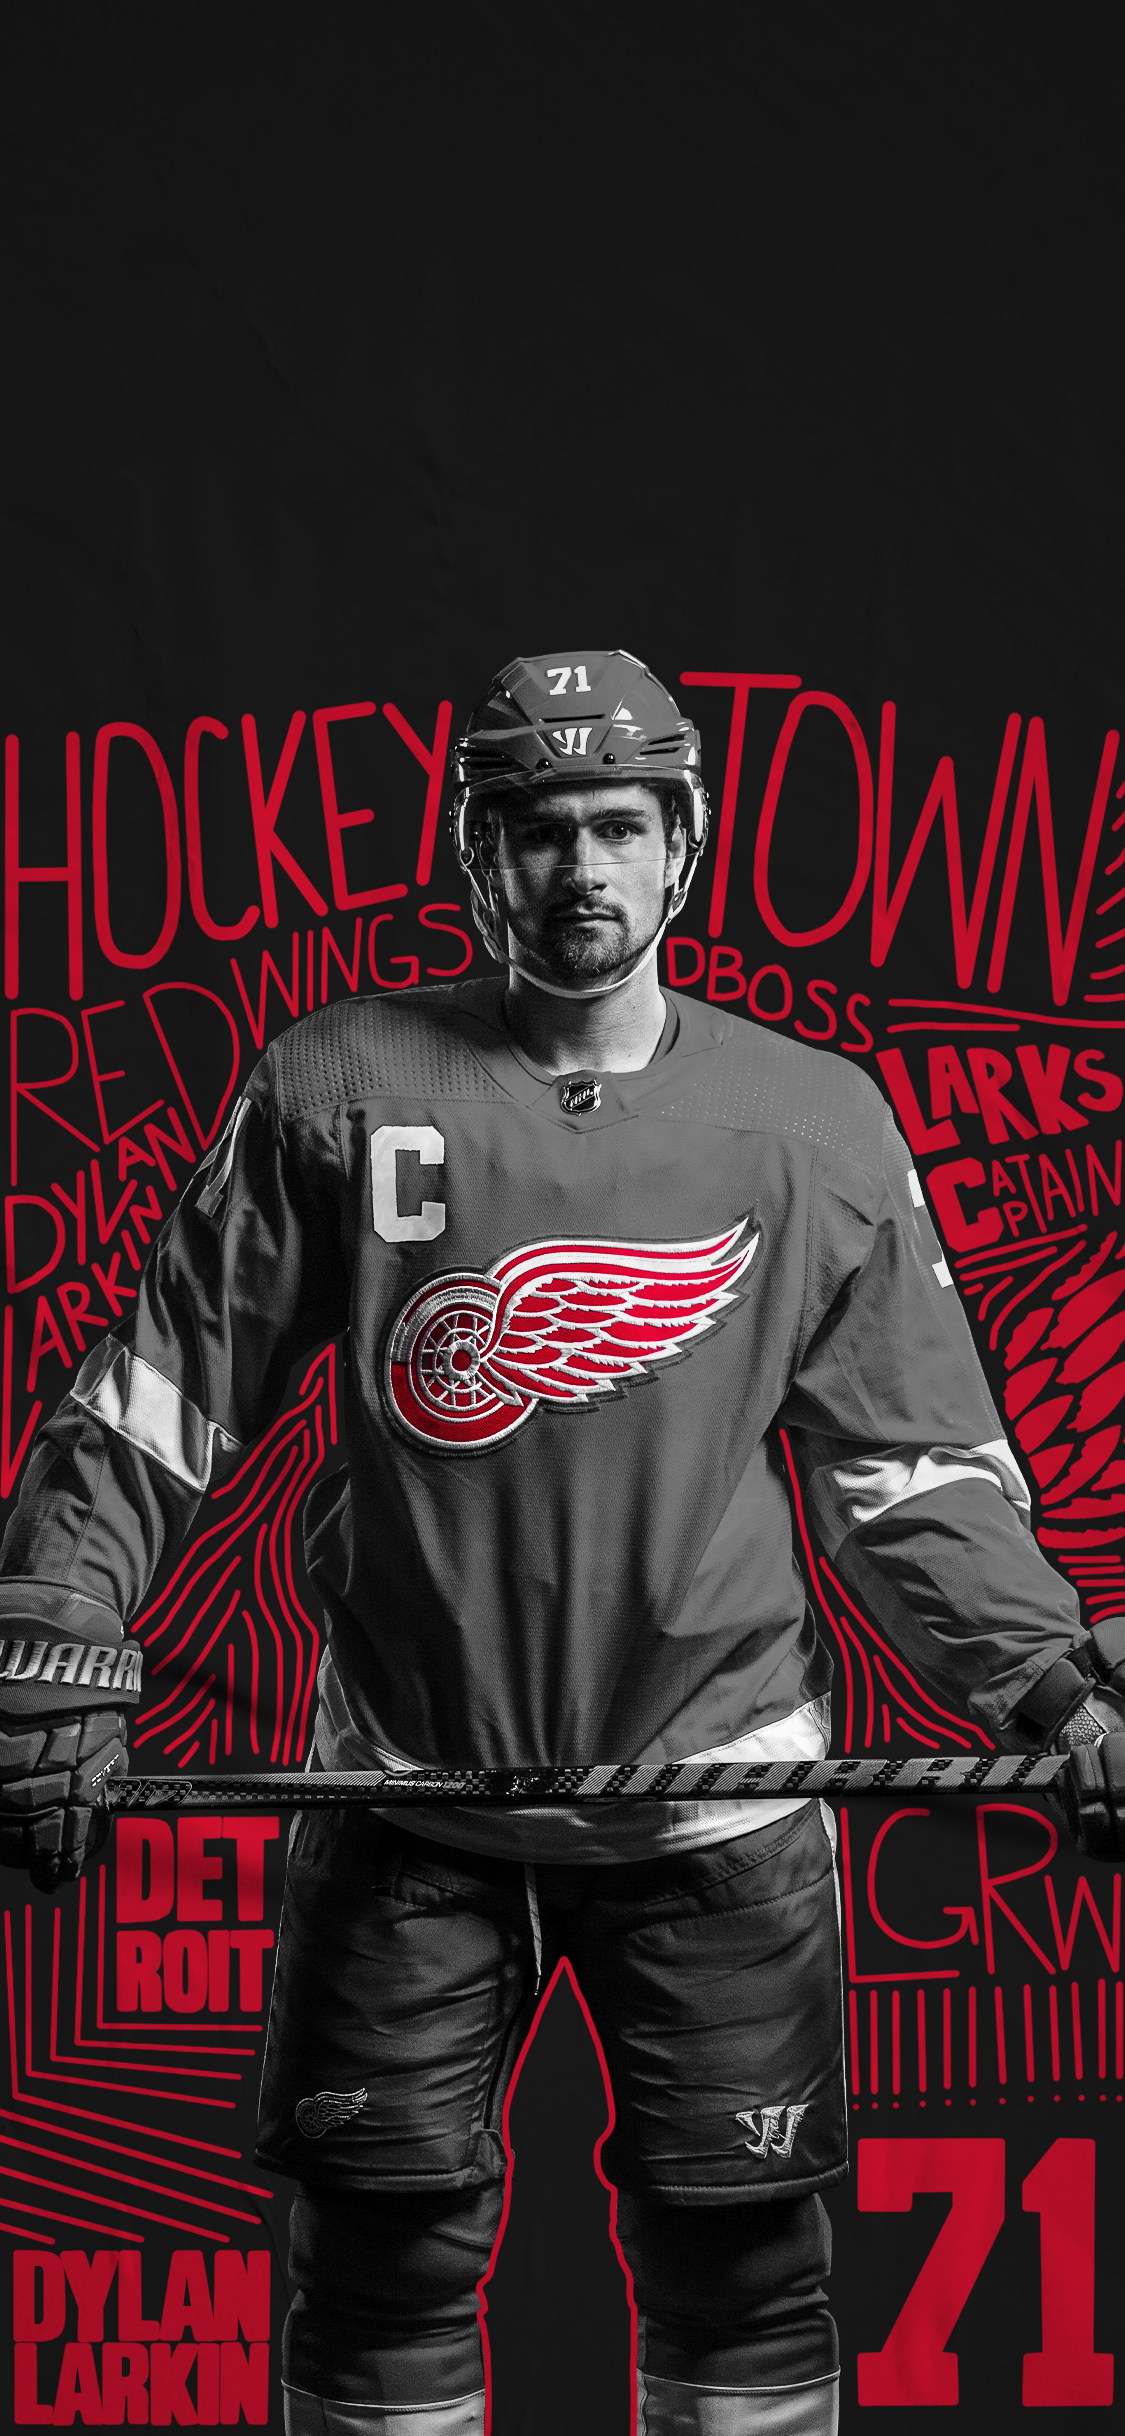 Detroit Red Wings on Twitter: "Fresh DBoss wallpapers for you. 📱🔥 #WallpaperWednesday x #LGRW https://t.co/hPwLnaD0mL" Twitter